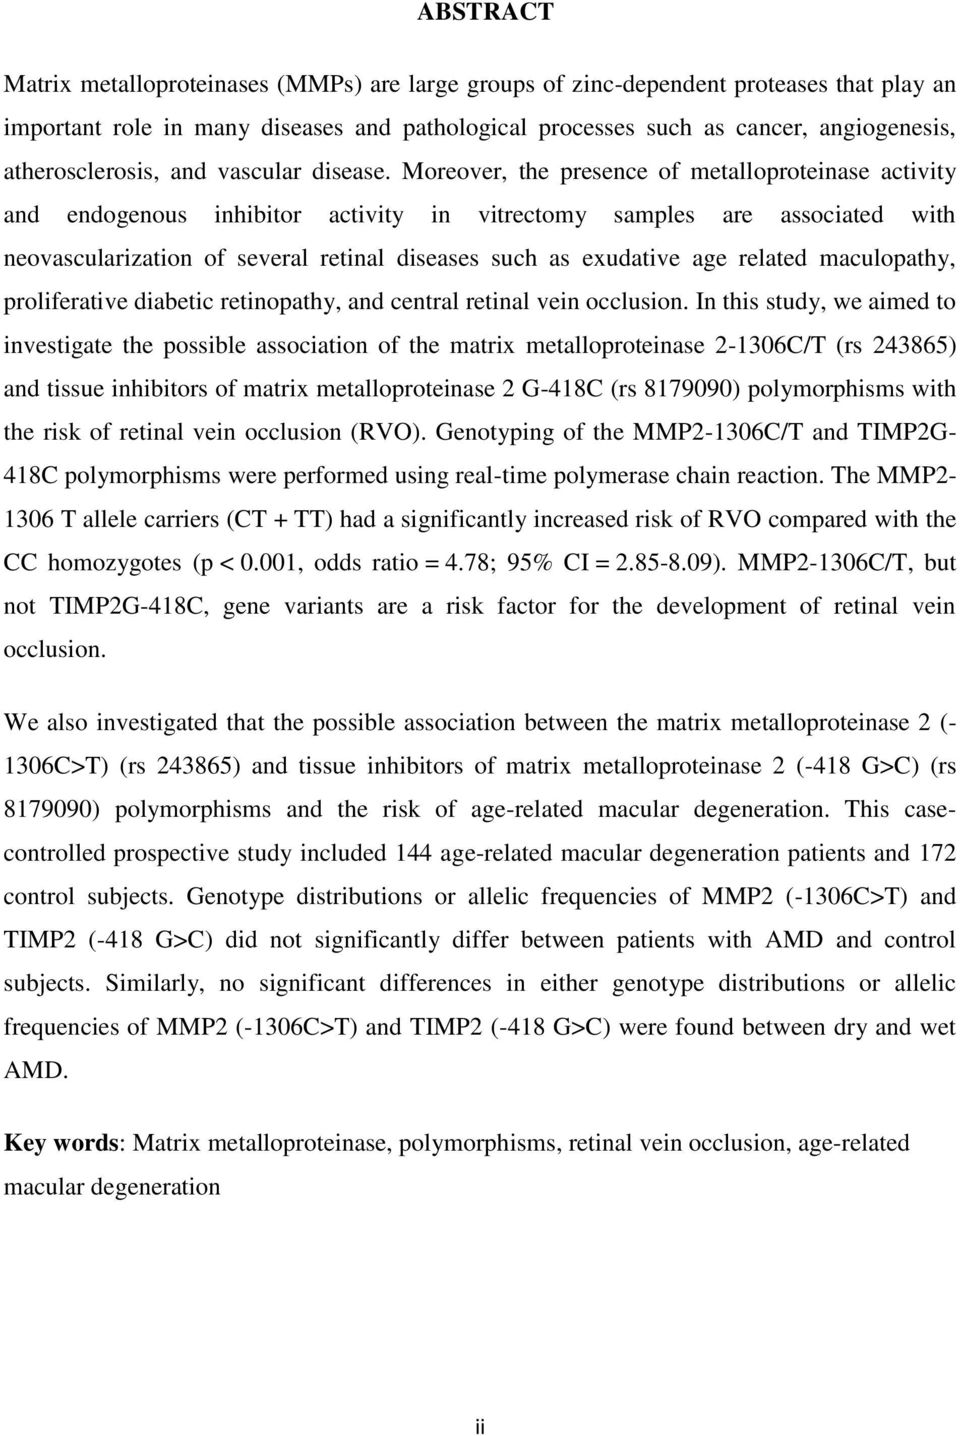 Moreover, the presence of metalloproteinase activity and endogenous inhibitor activity in vitrectomy samples are associated with neovascularization of several retinal diseases such as exudative age